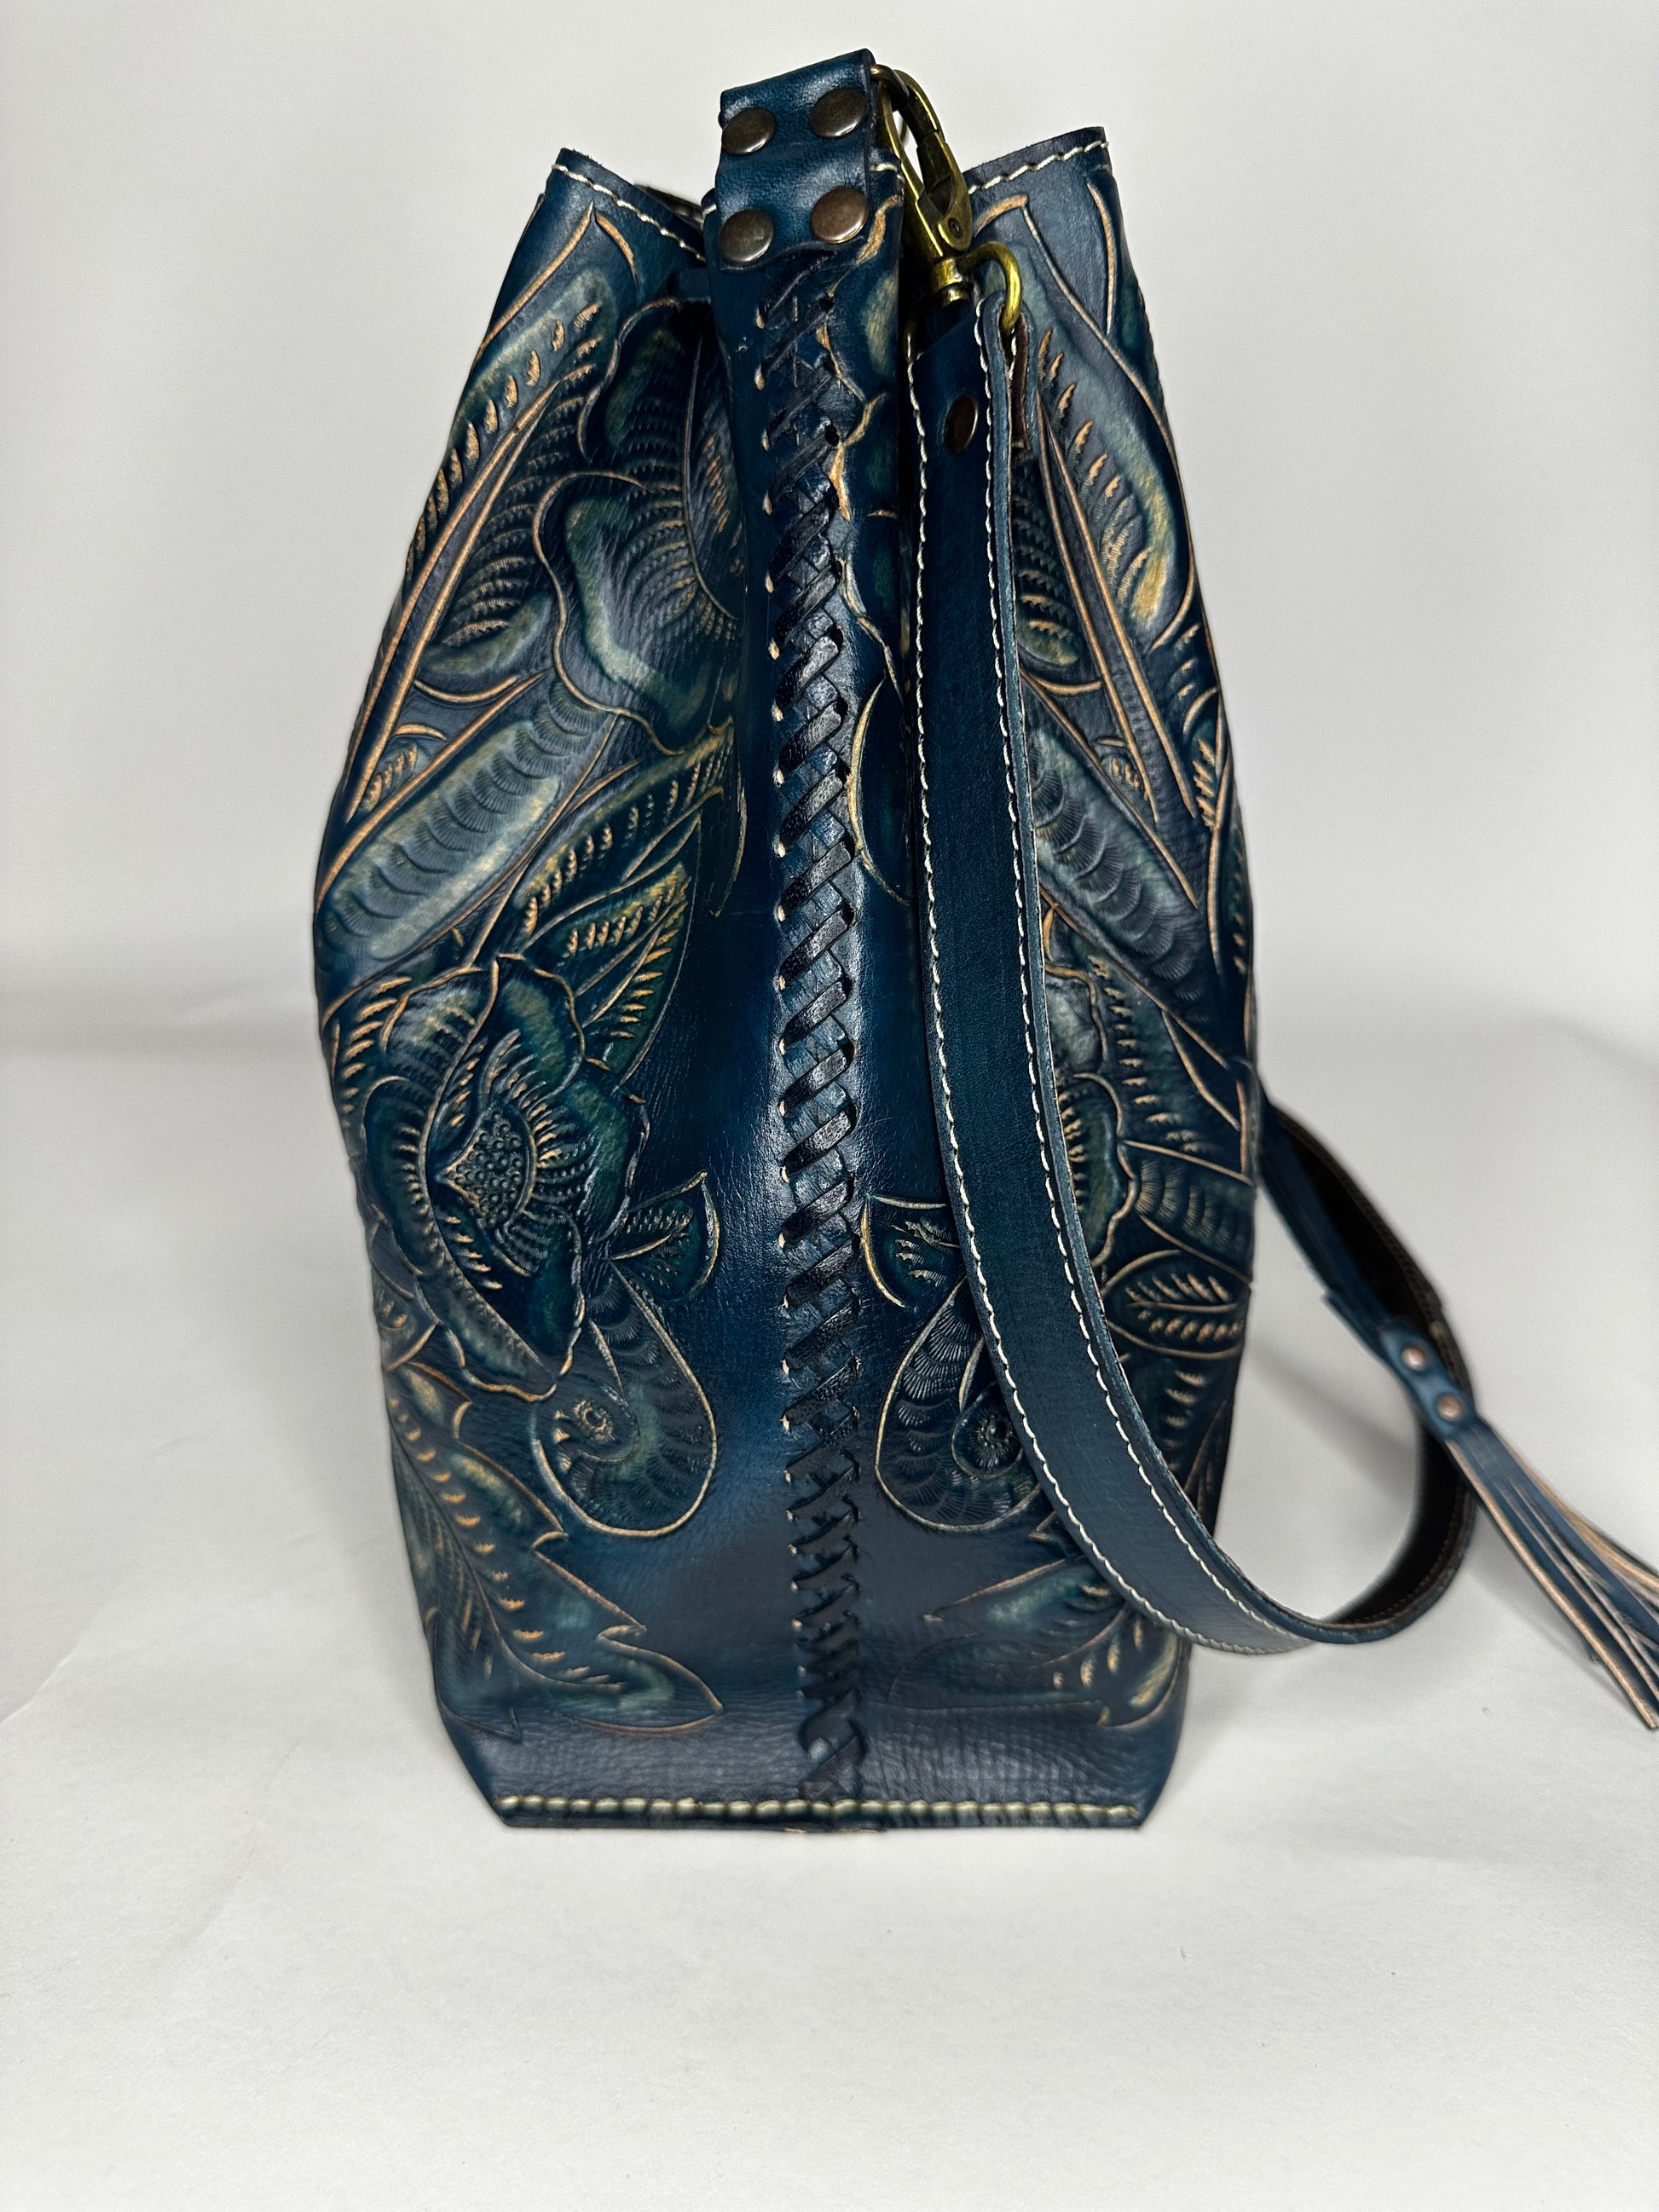 Mexican leather backpack with contrasting hand etched design throughout bag. Has one strap for crossbody capability and leather ties in front to close. Leather stitching on the side. 